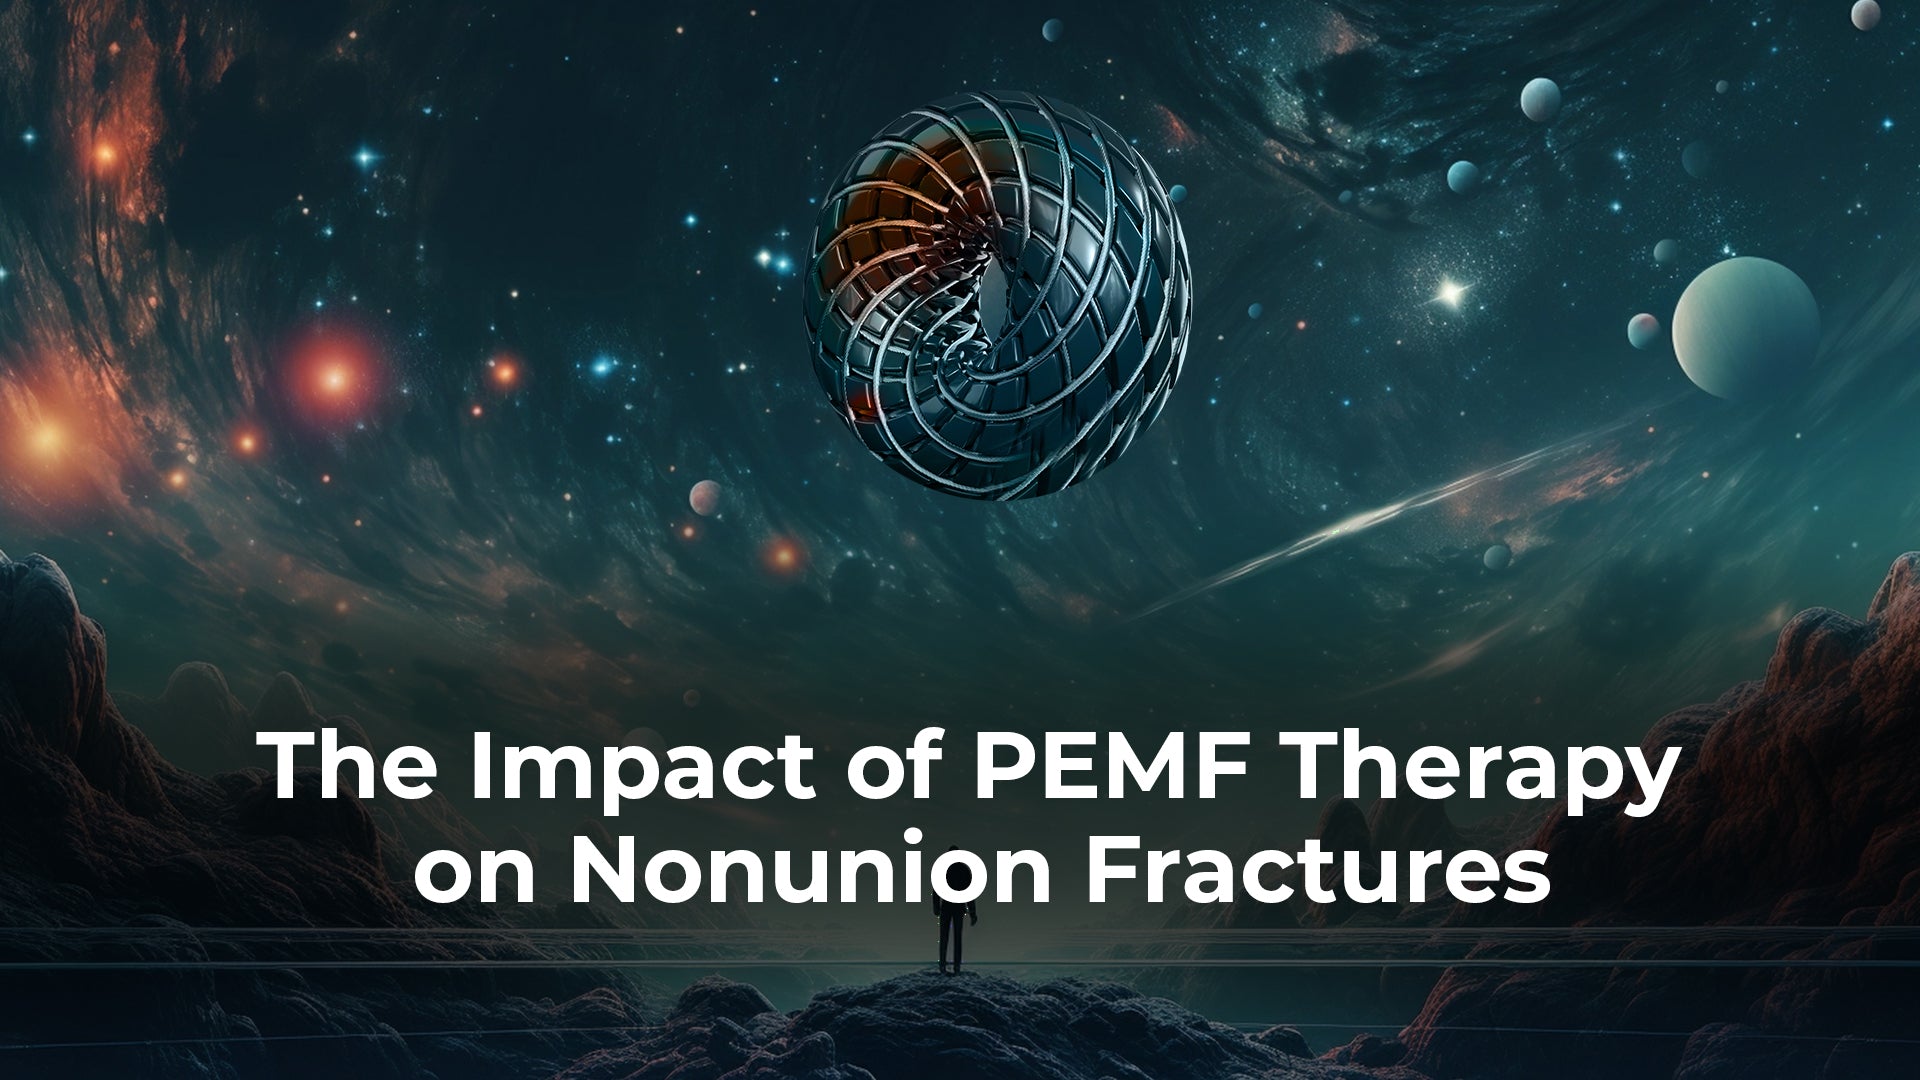 The Impact of PEMF Therapy on Nonunion Fractures